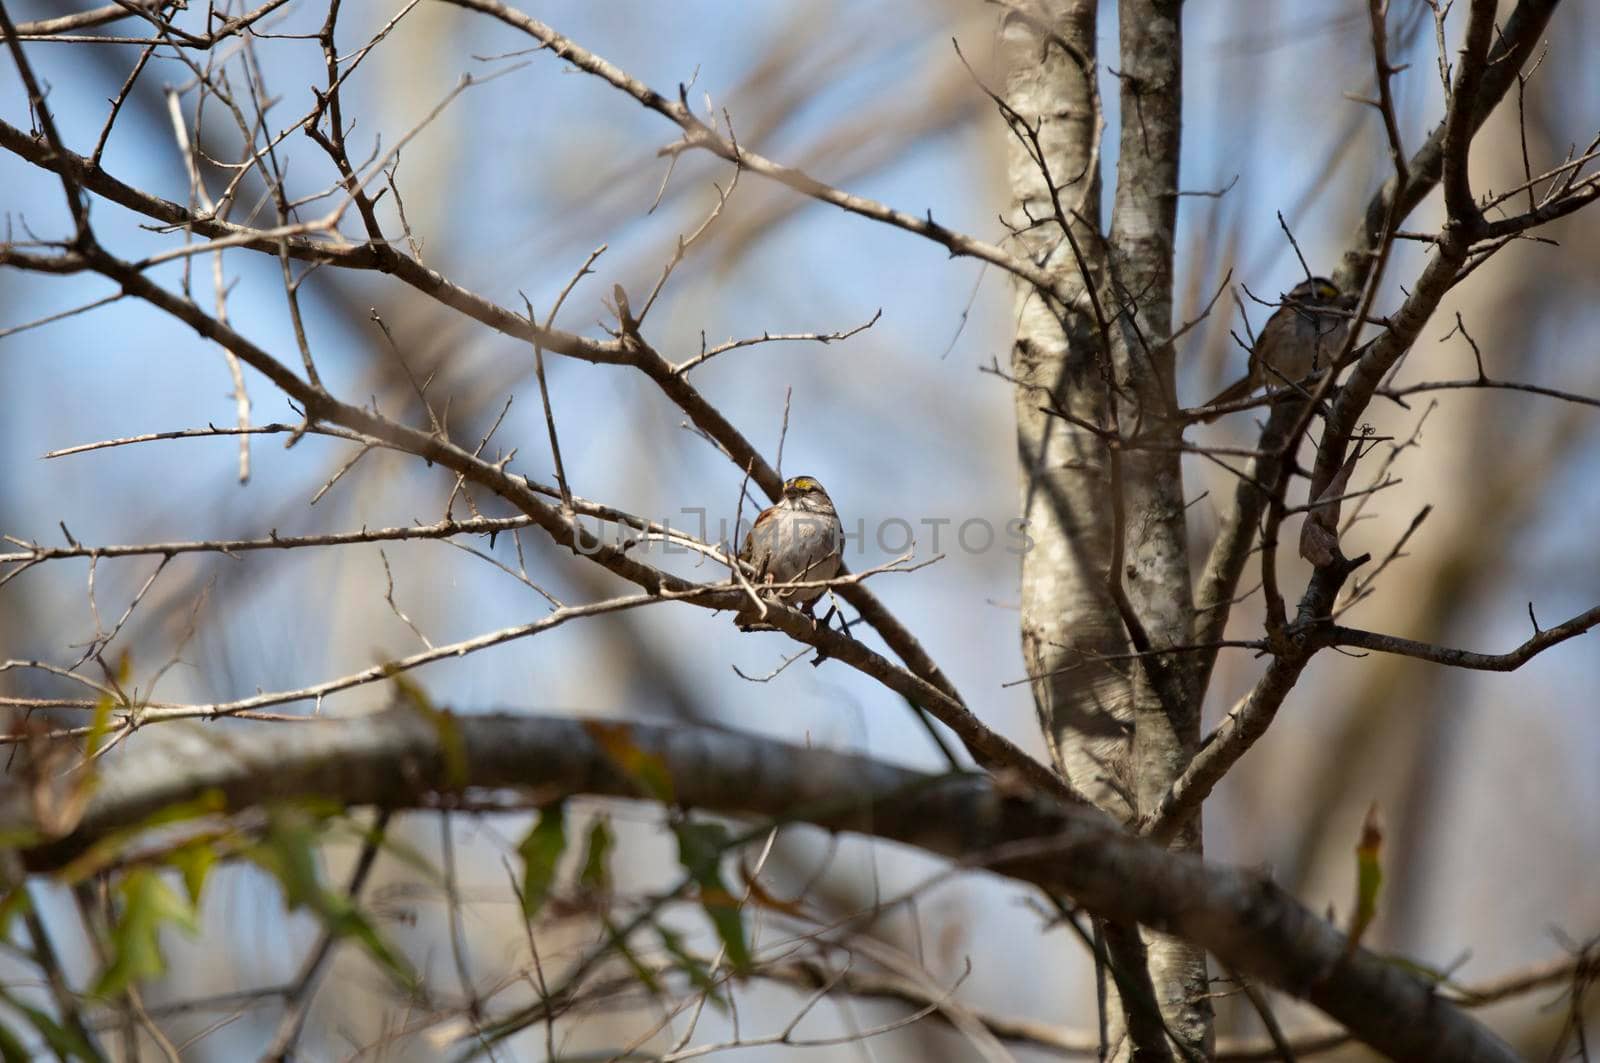 White-throated sparrow (Zonotrichia albicollis) looking out from its perch on a tree branch